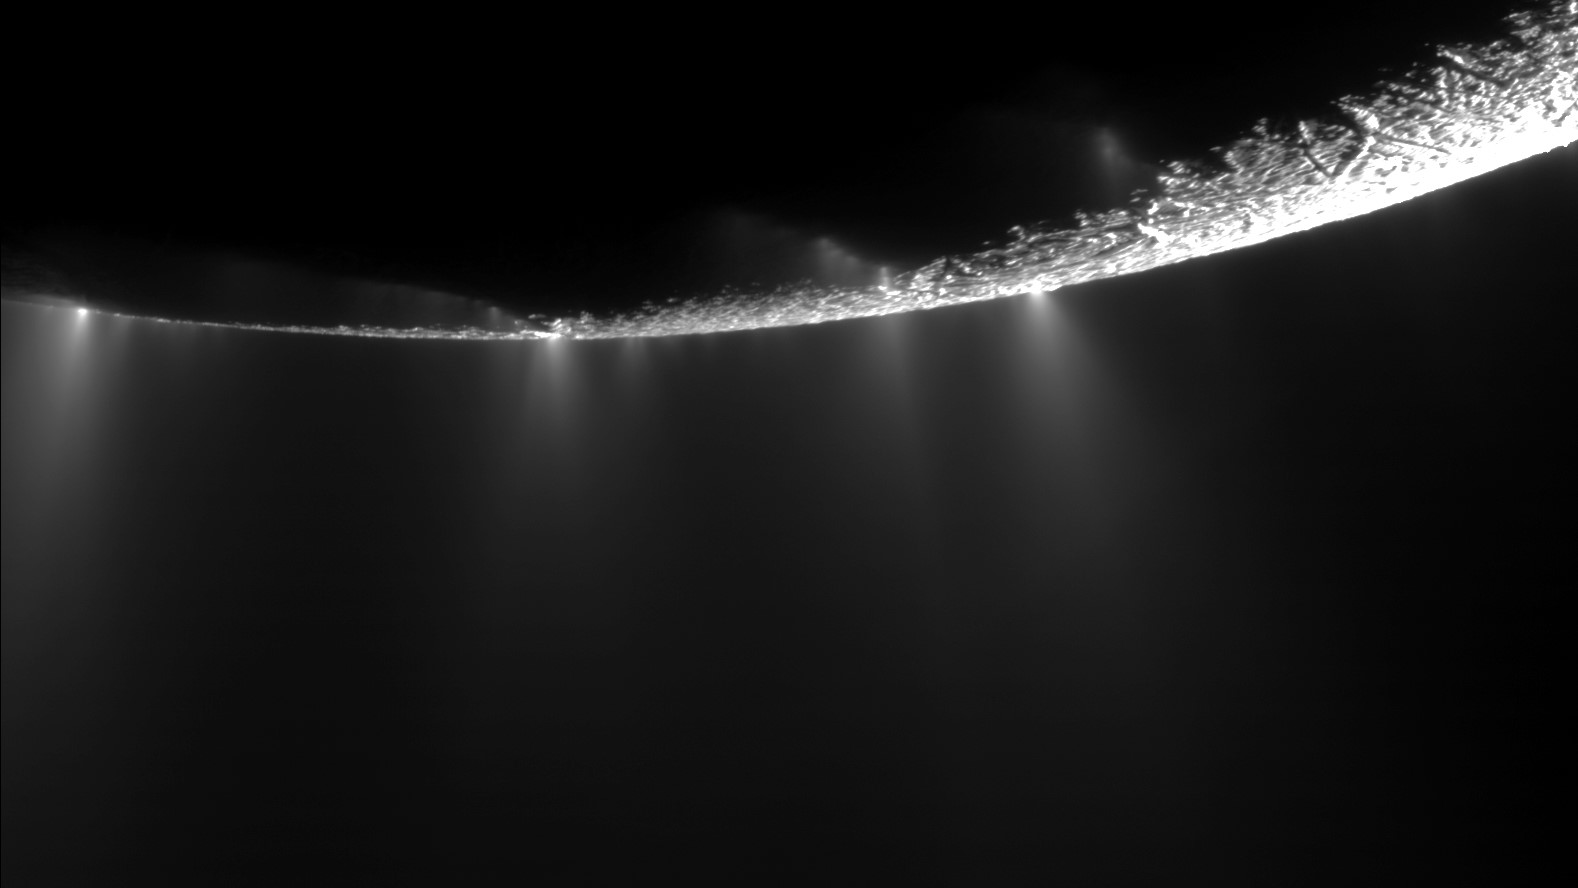 Close up of Enceladus showing water appearing to spray out of the surface into the darkness of space.